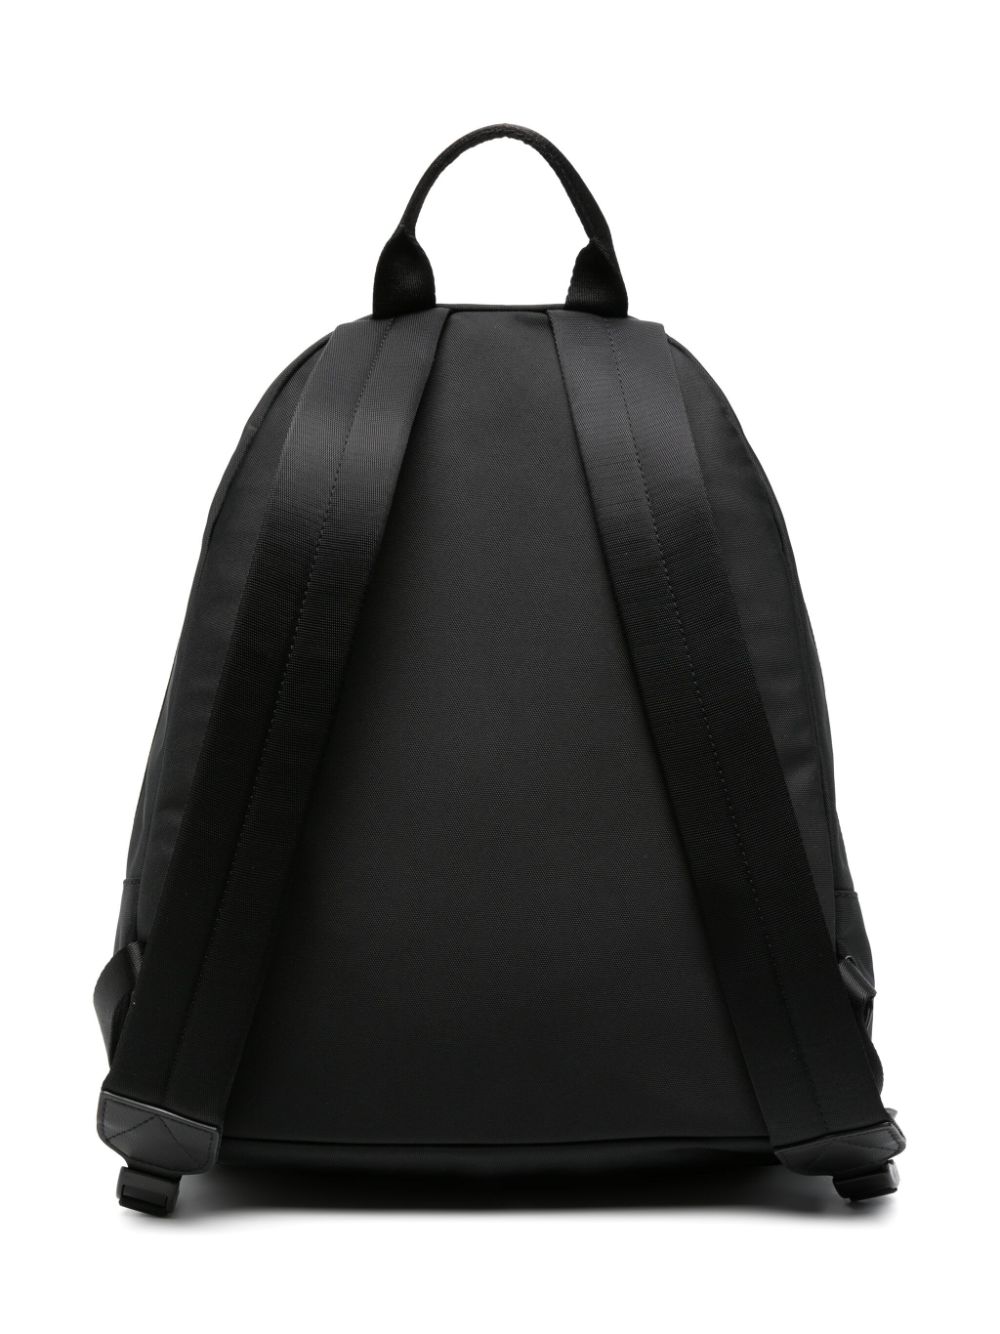 Black backpack for girls with logo